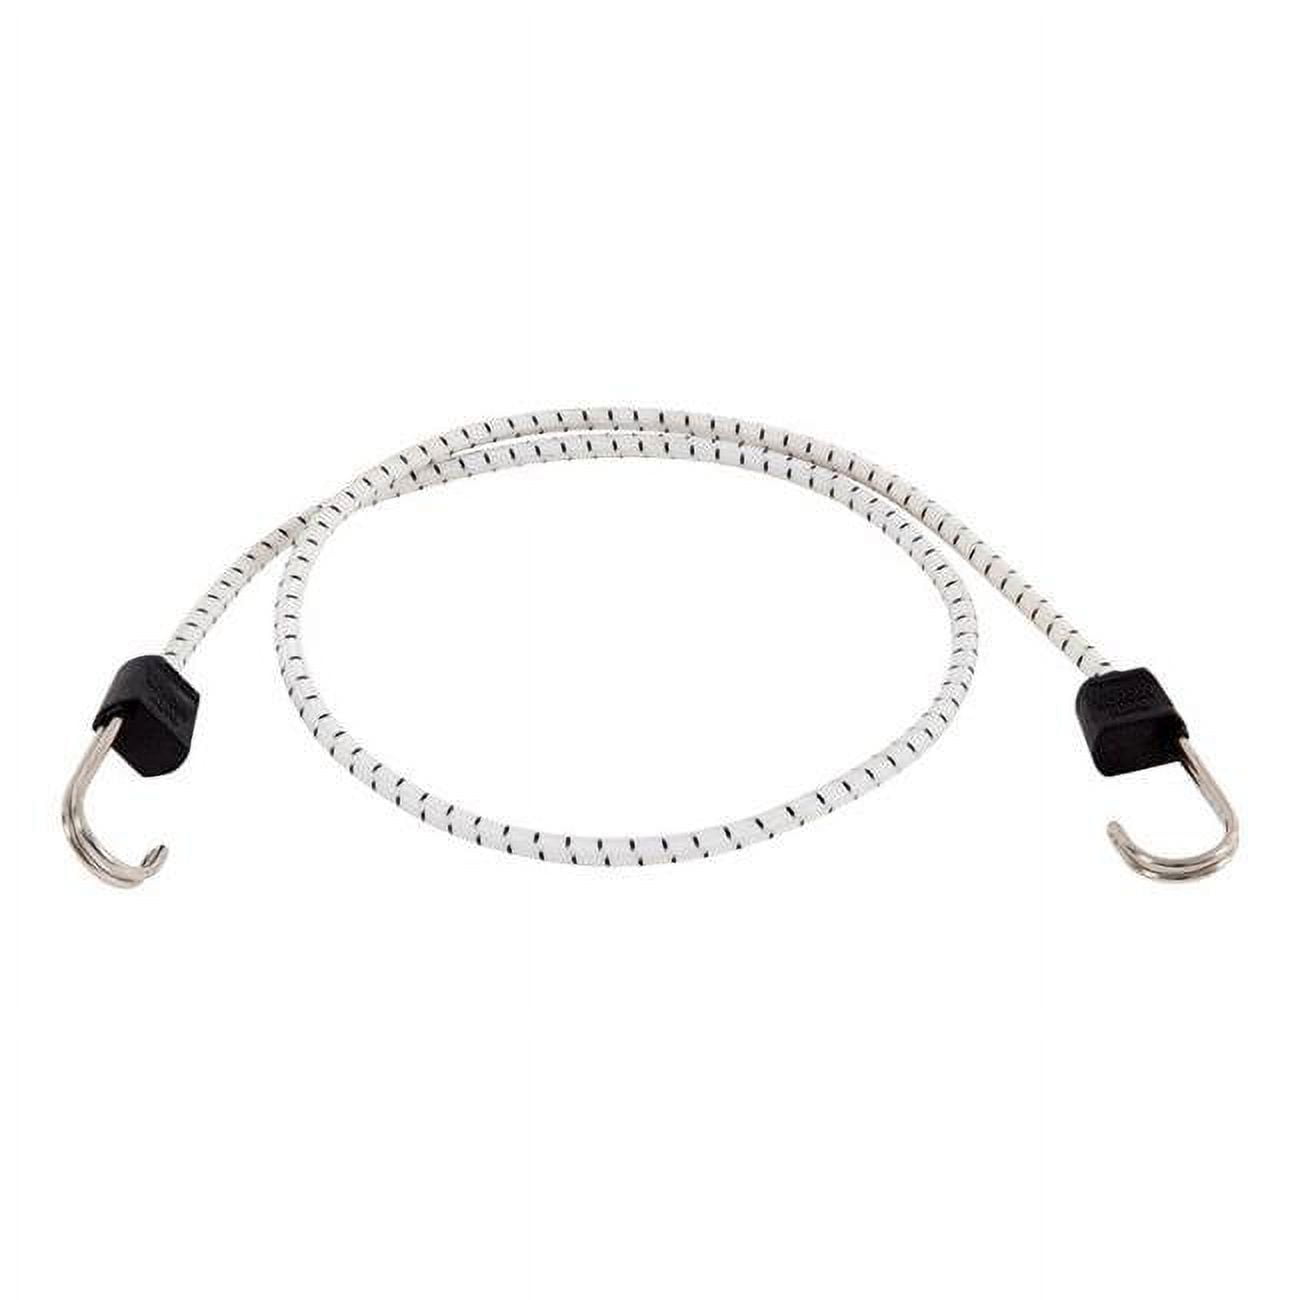 8865842 48 In. Marine Twin Anchor Bungee Cord, White & Black - Pack Of 10